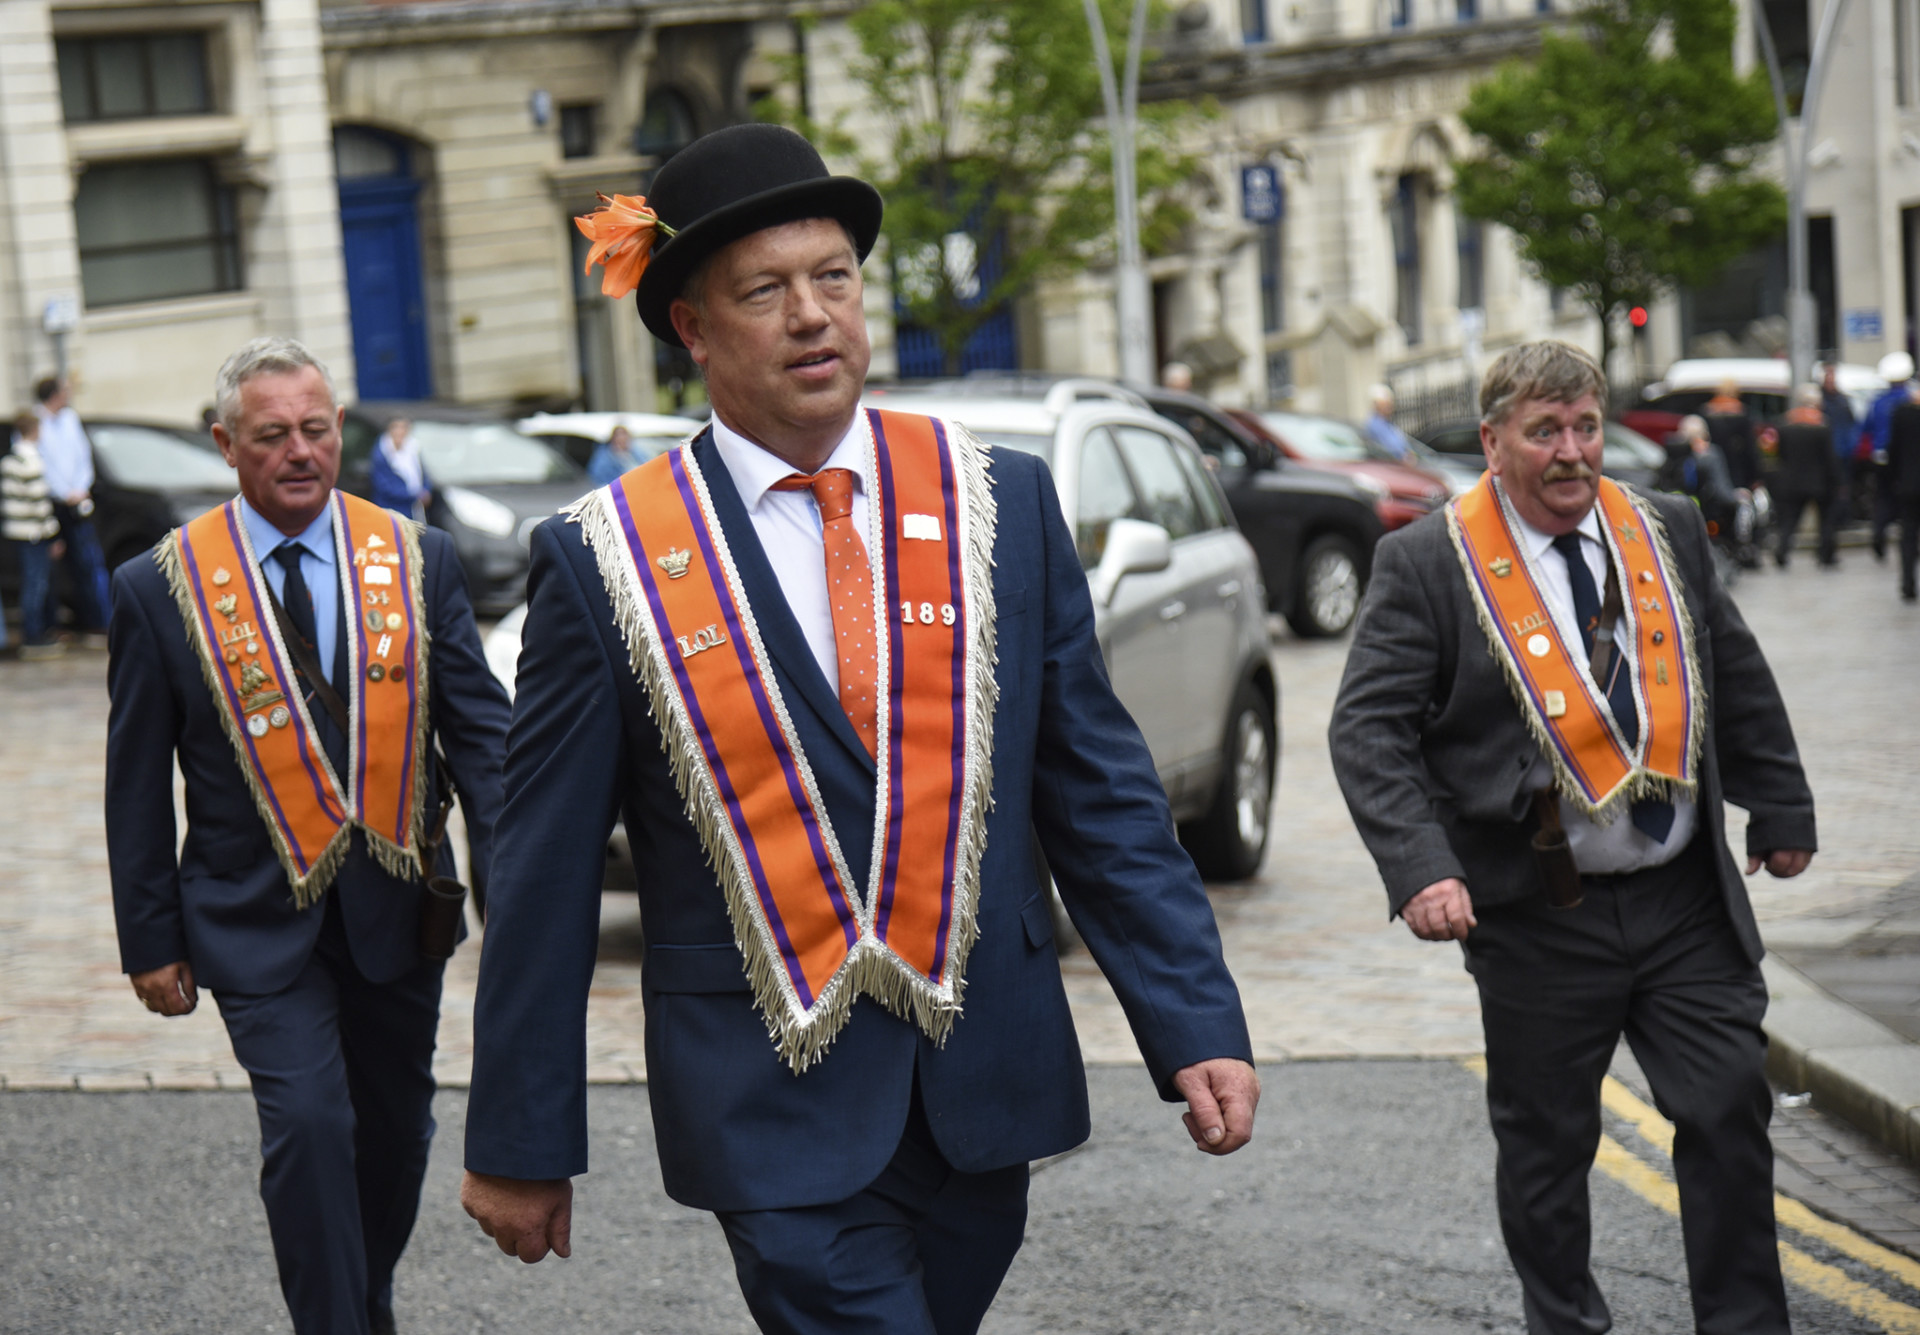 Gallery: The Twelfth celebrations